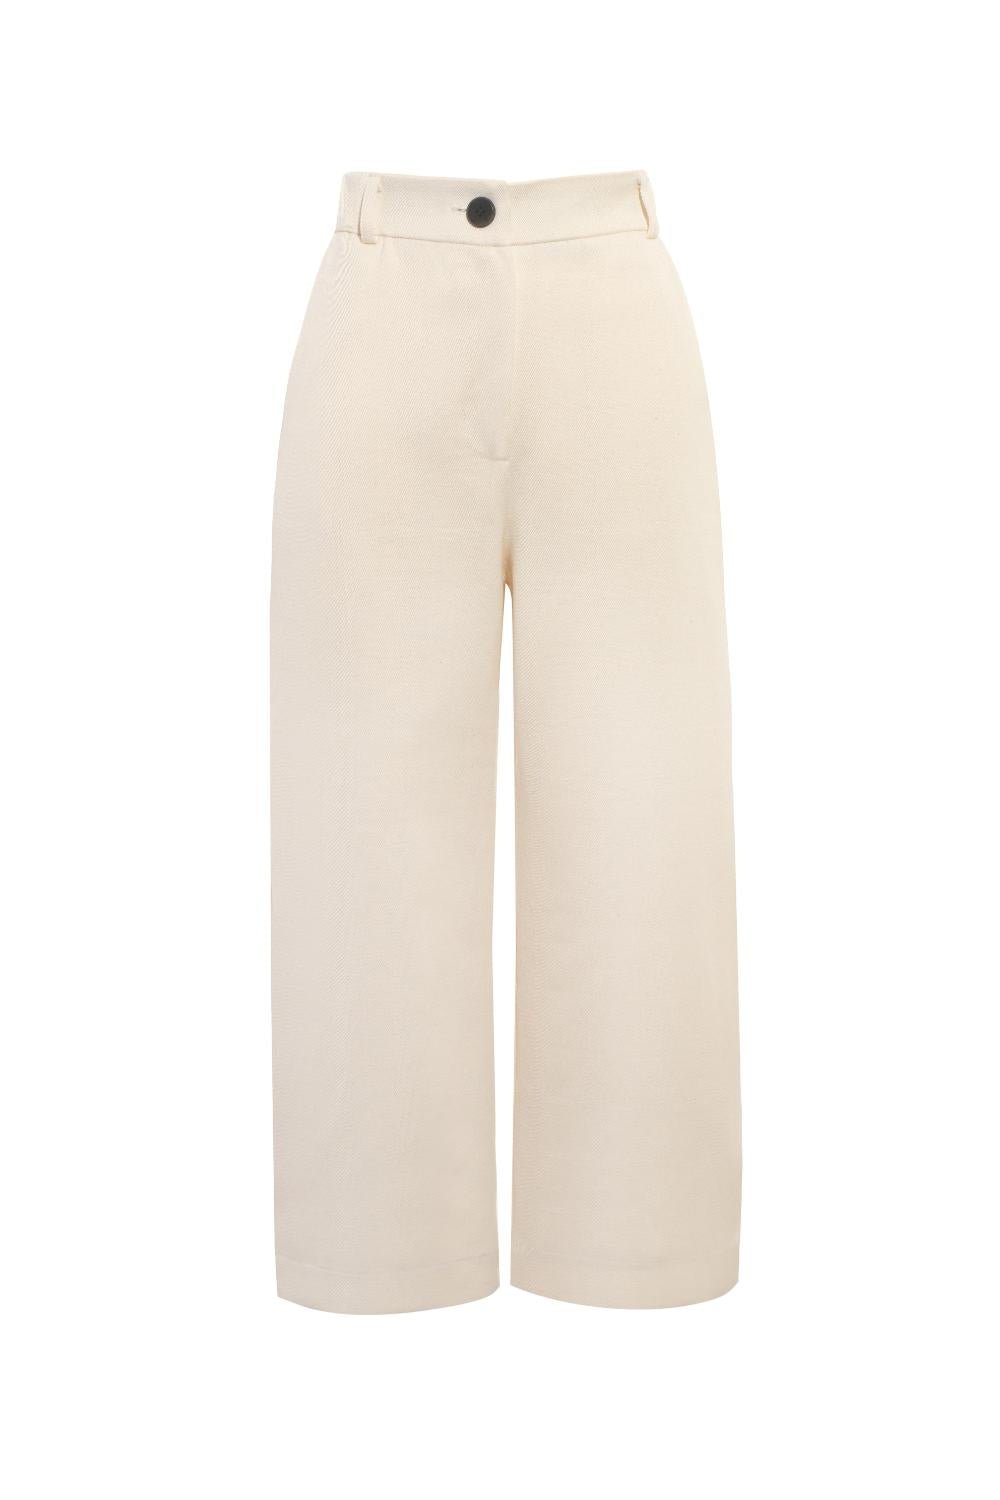 Organic Cotton Twill Wide Leg Cropped Trouser - Onesta UK - #ethical_Clothes#